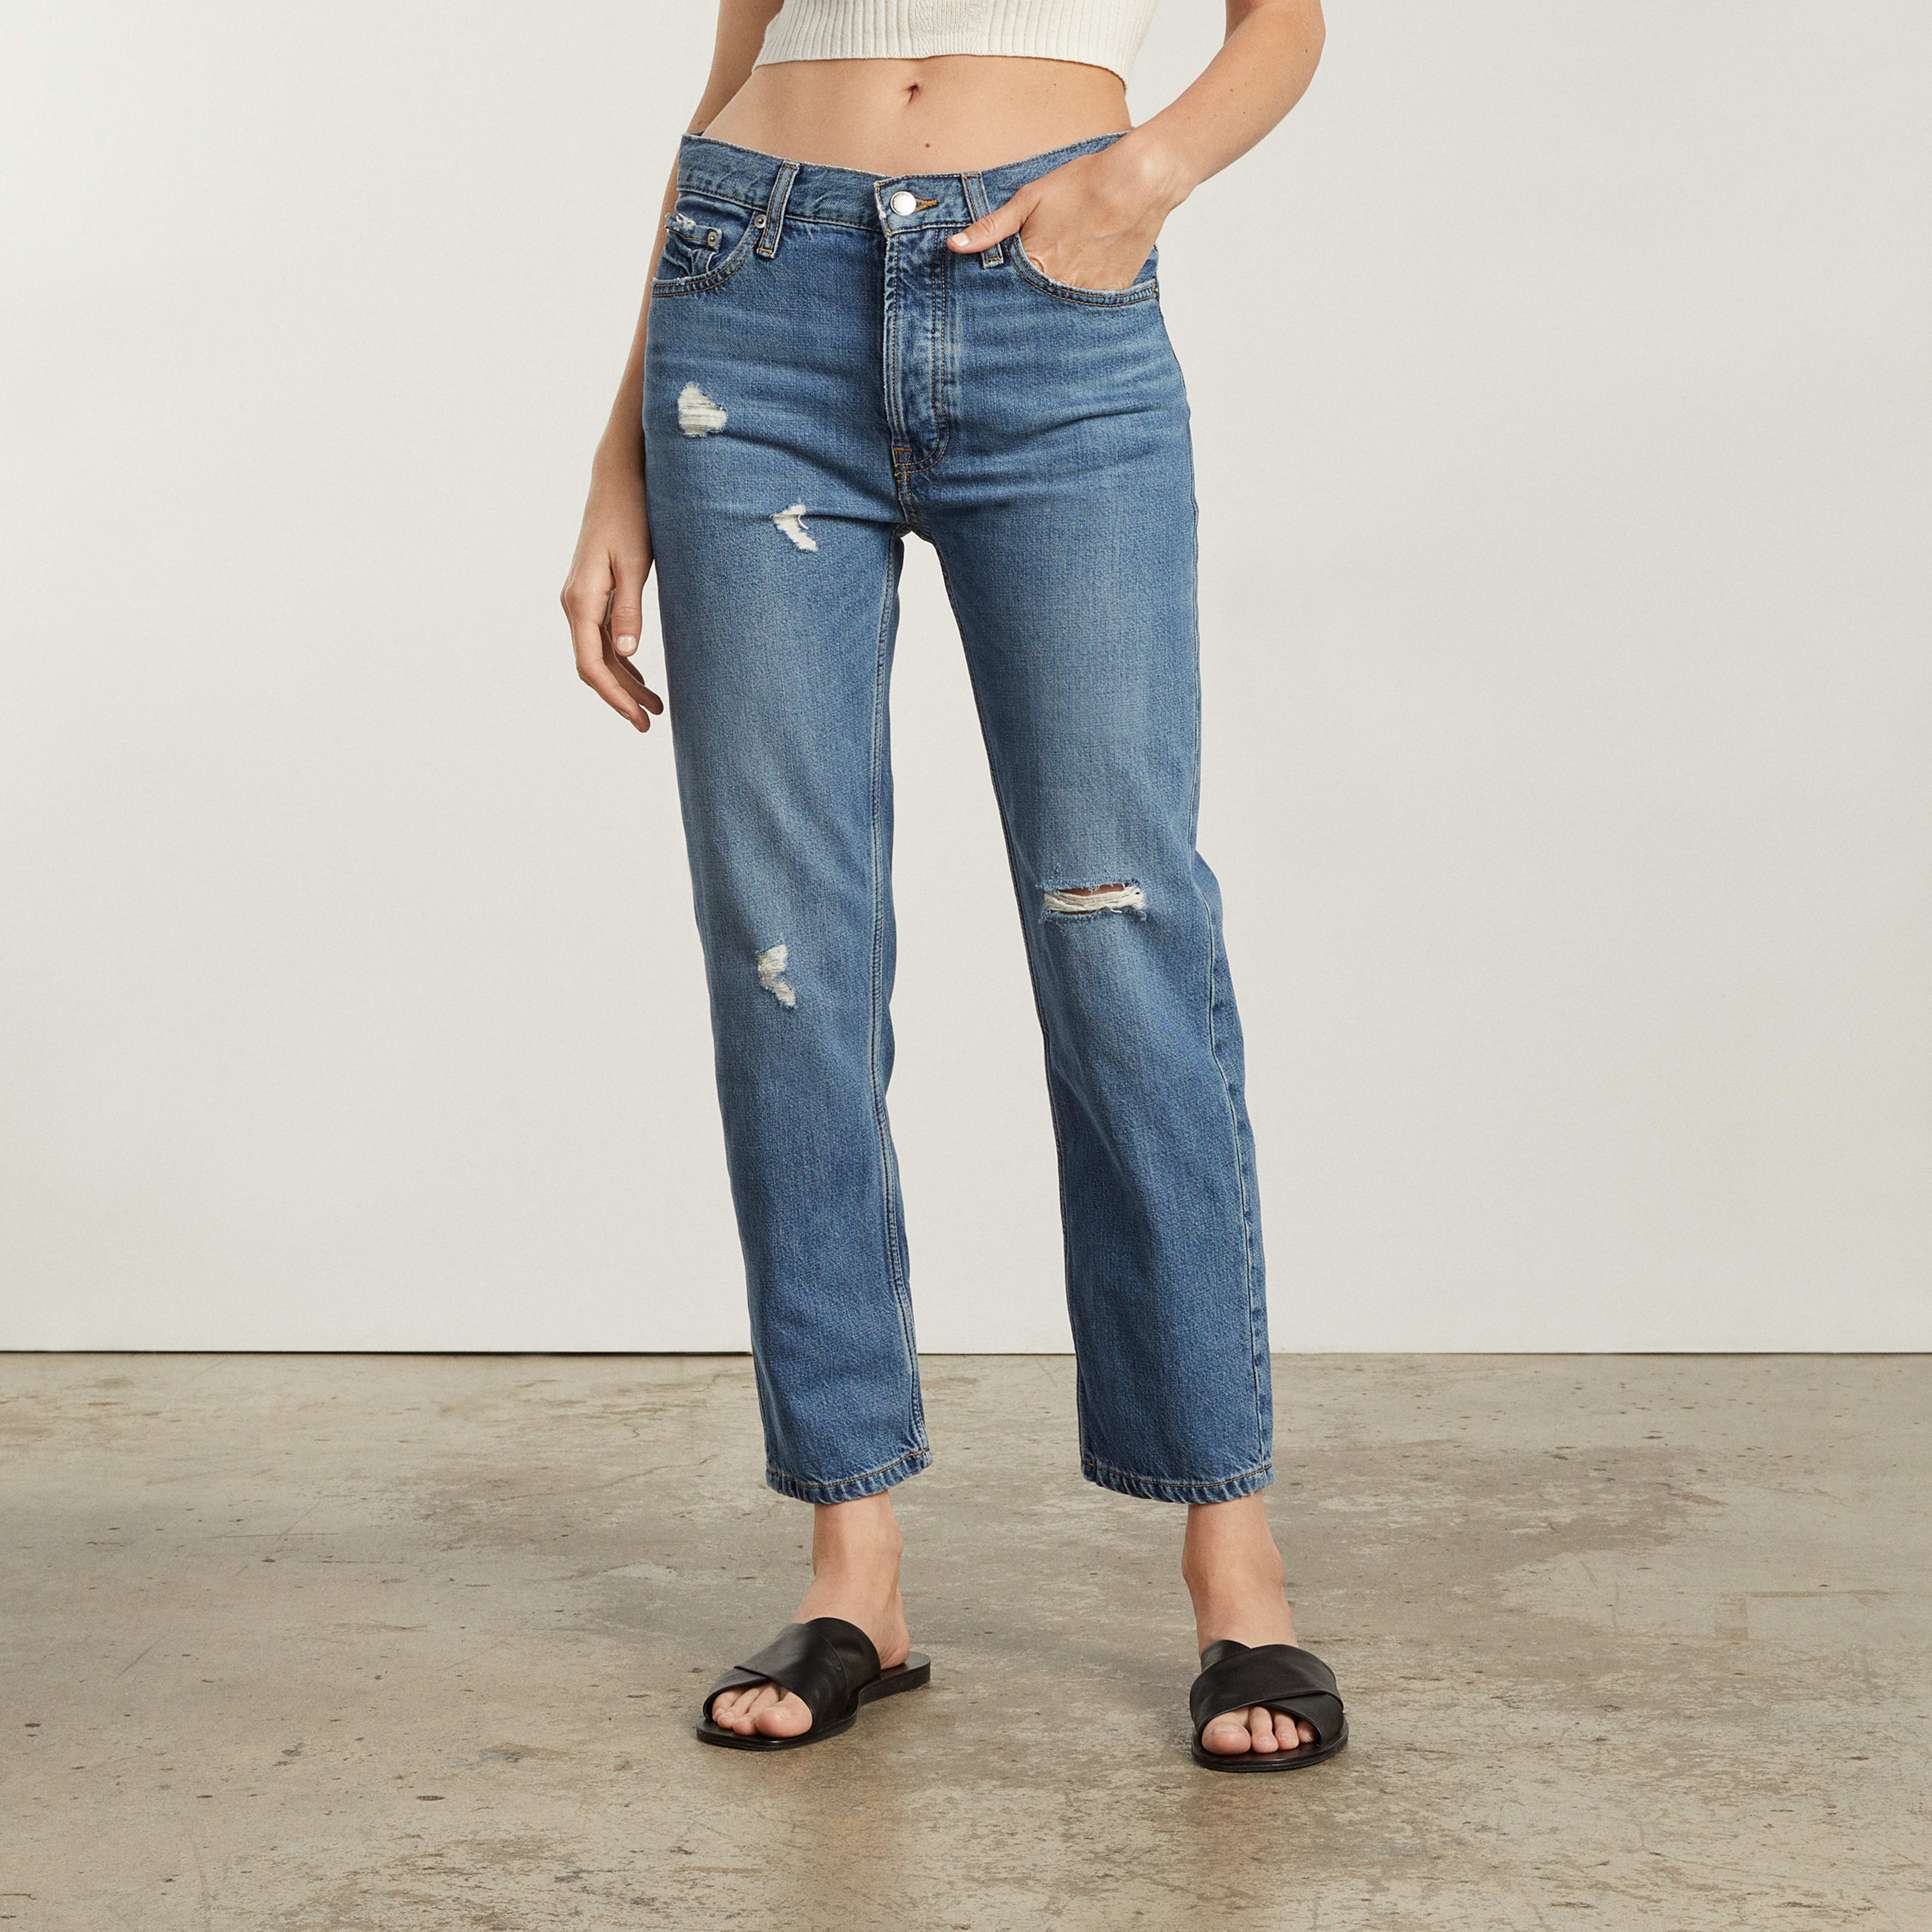 Women's Summer Slouch Jean by Everlane in Tularosa, Size 23